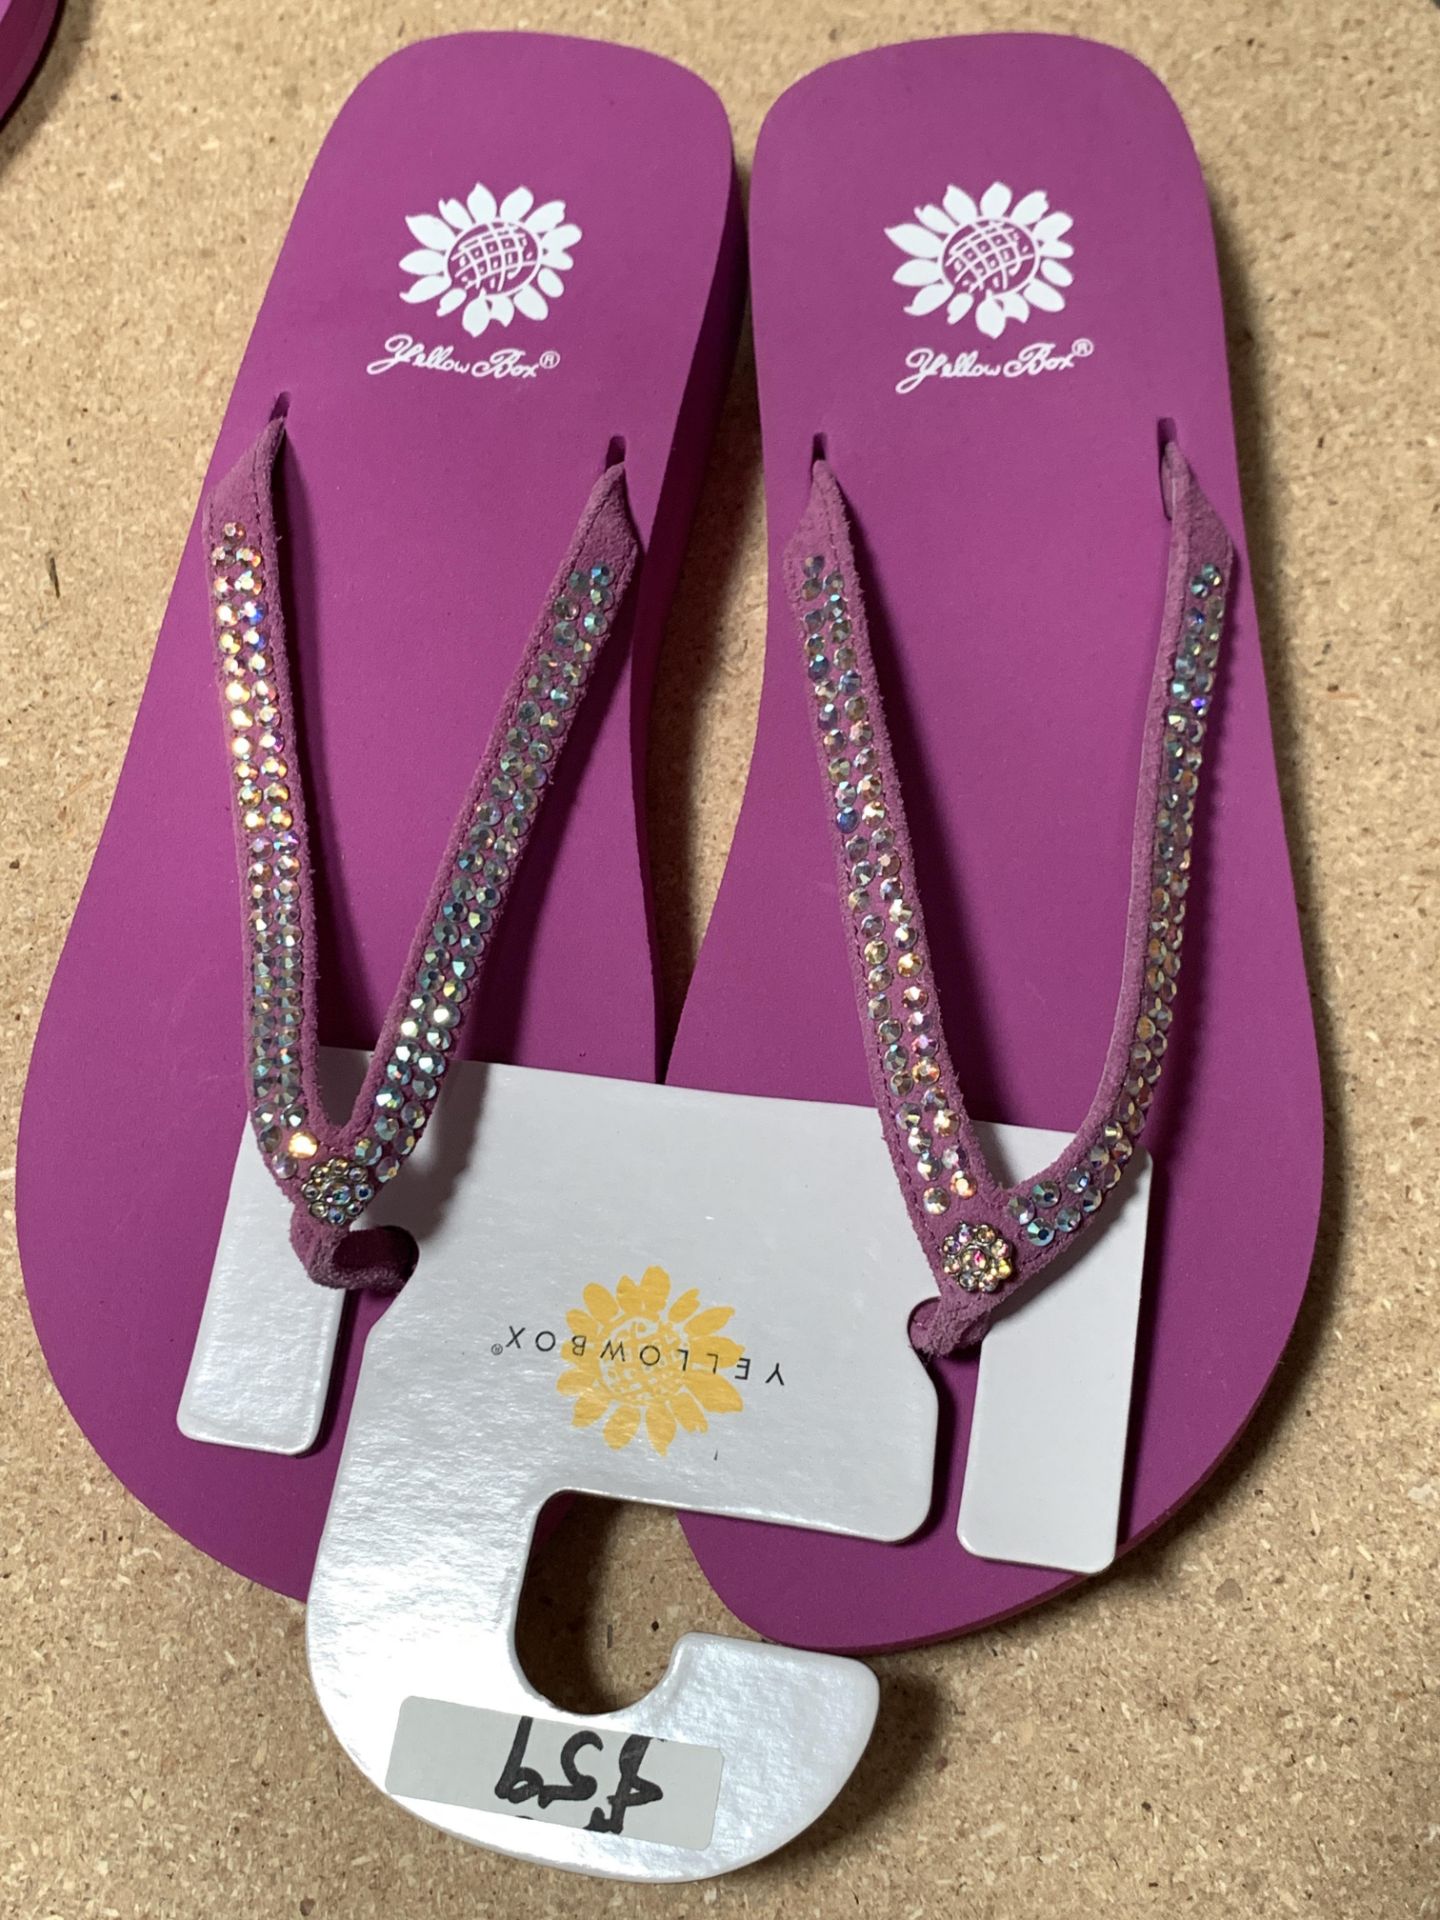 8 Pairs Yellow Box Flip Flop Sandals, Jello, Pink w. Crystals, New, Various Sizes (Retail $472) - Image 3 of 4